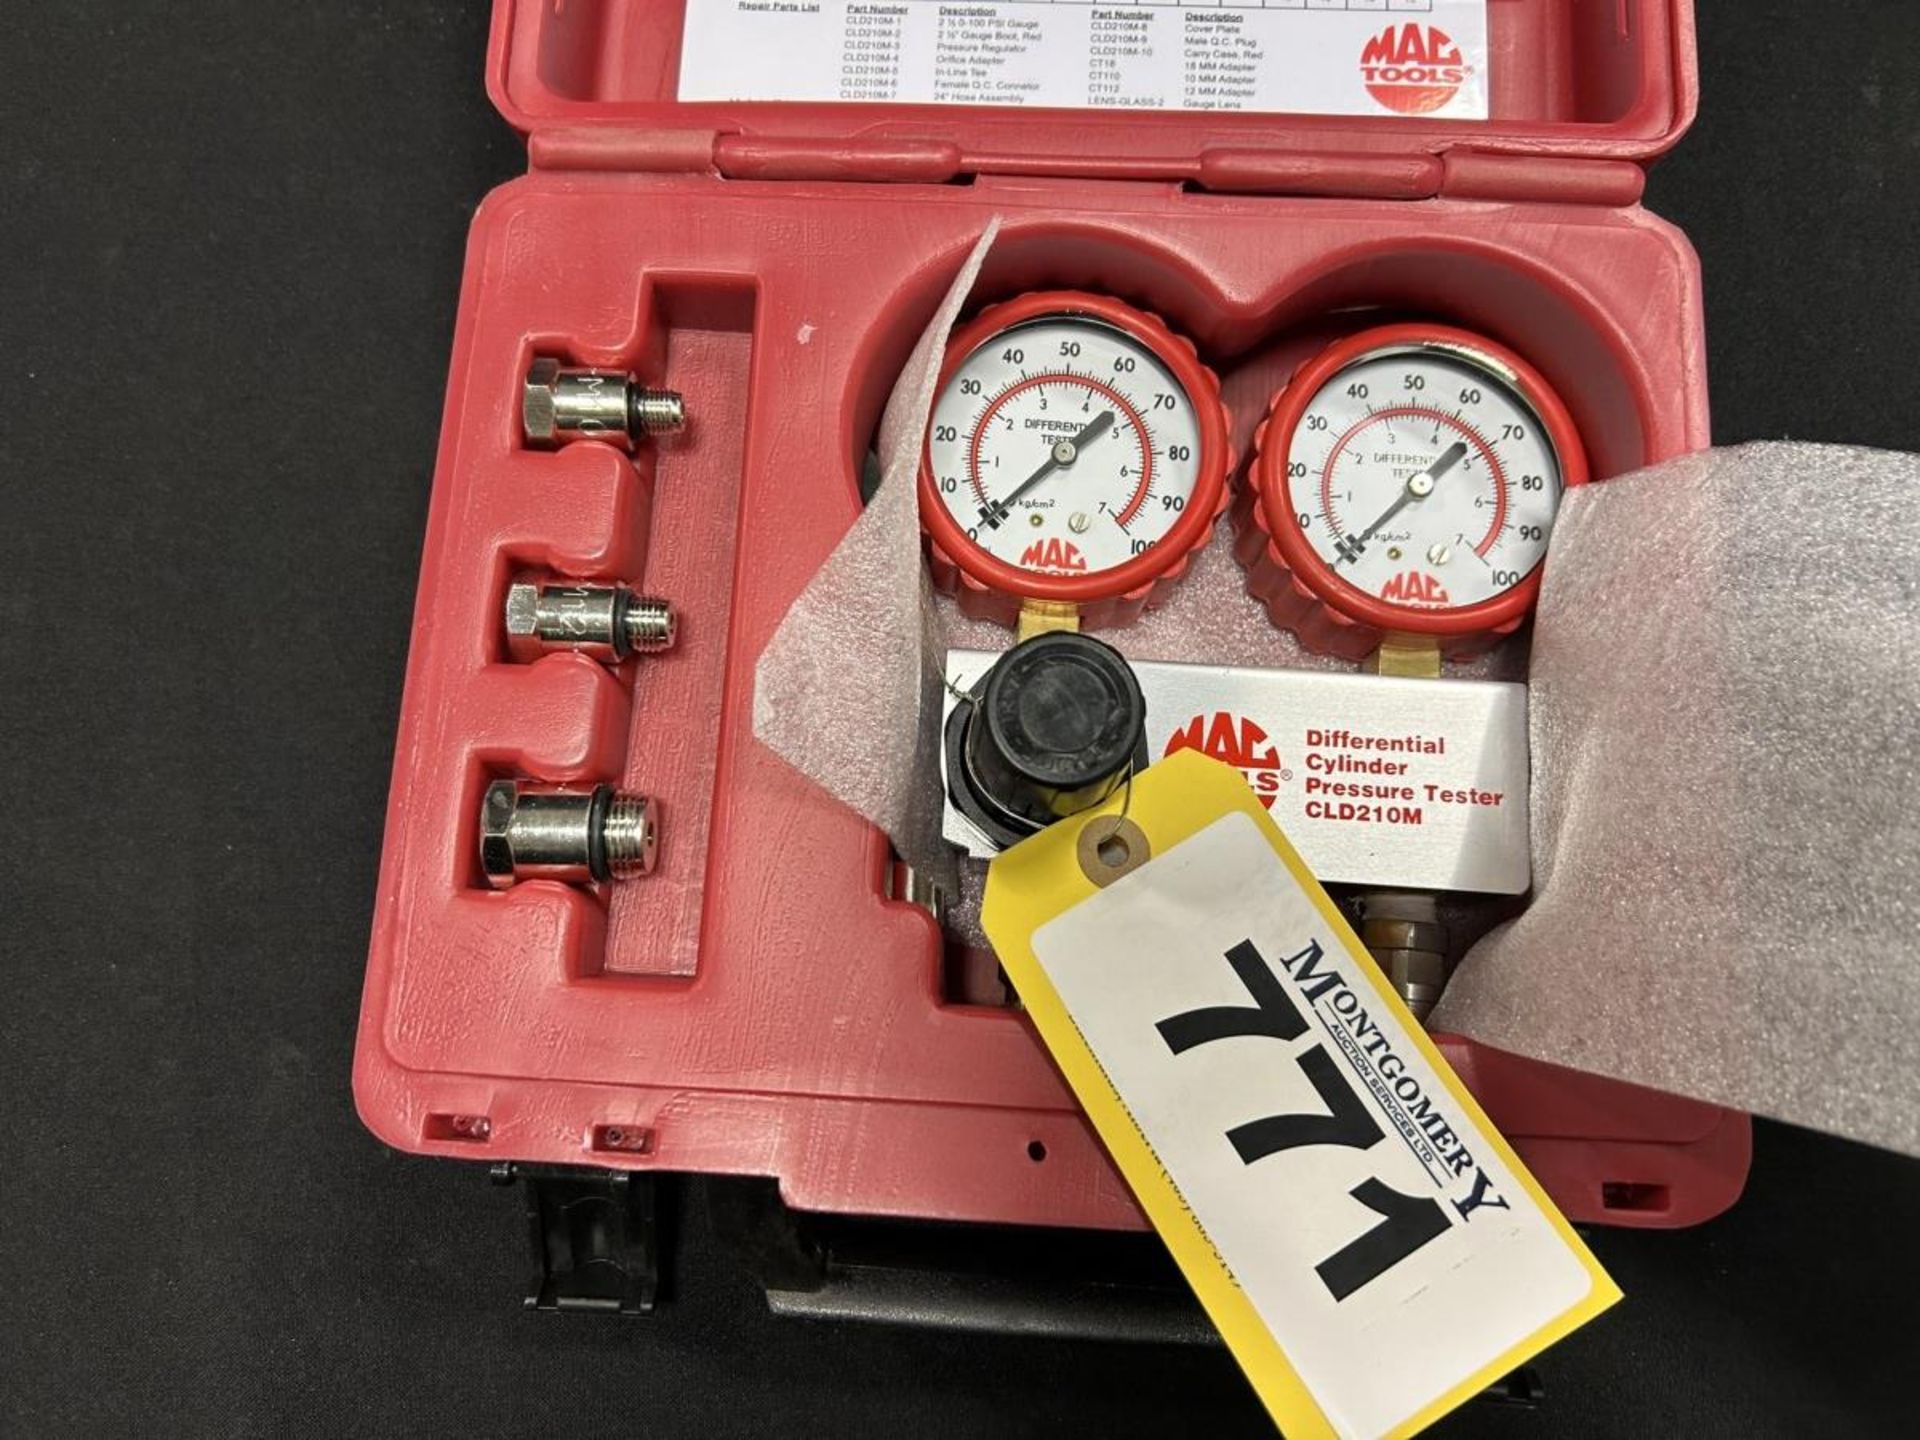 MAC TOOLS DIFFERENTIAL CYLINDER PRESSURE TESTER PART NO. CLD210M